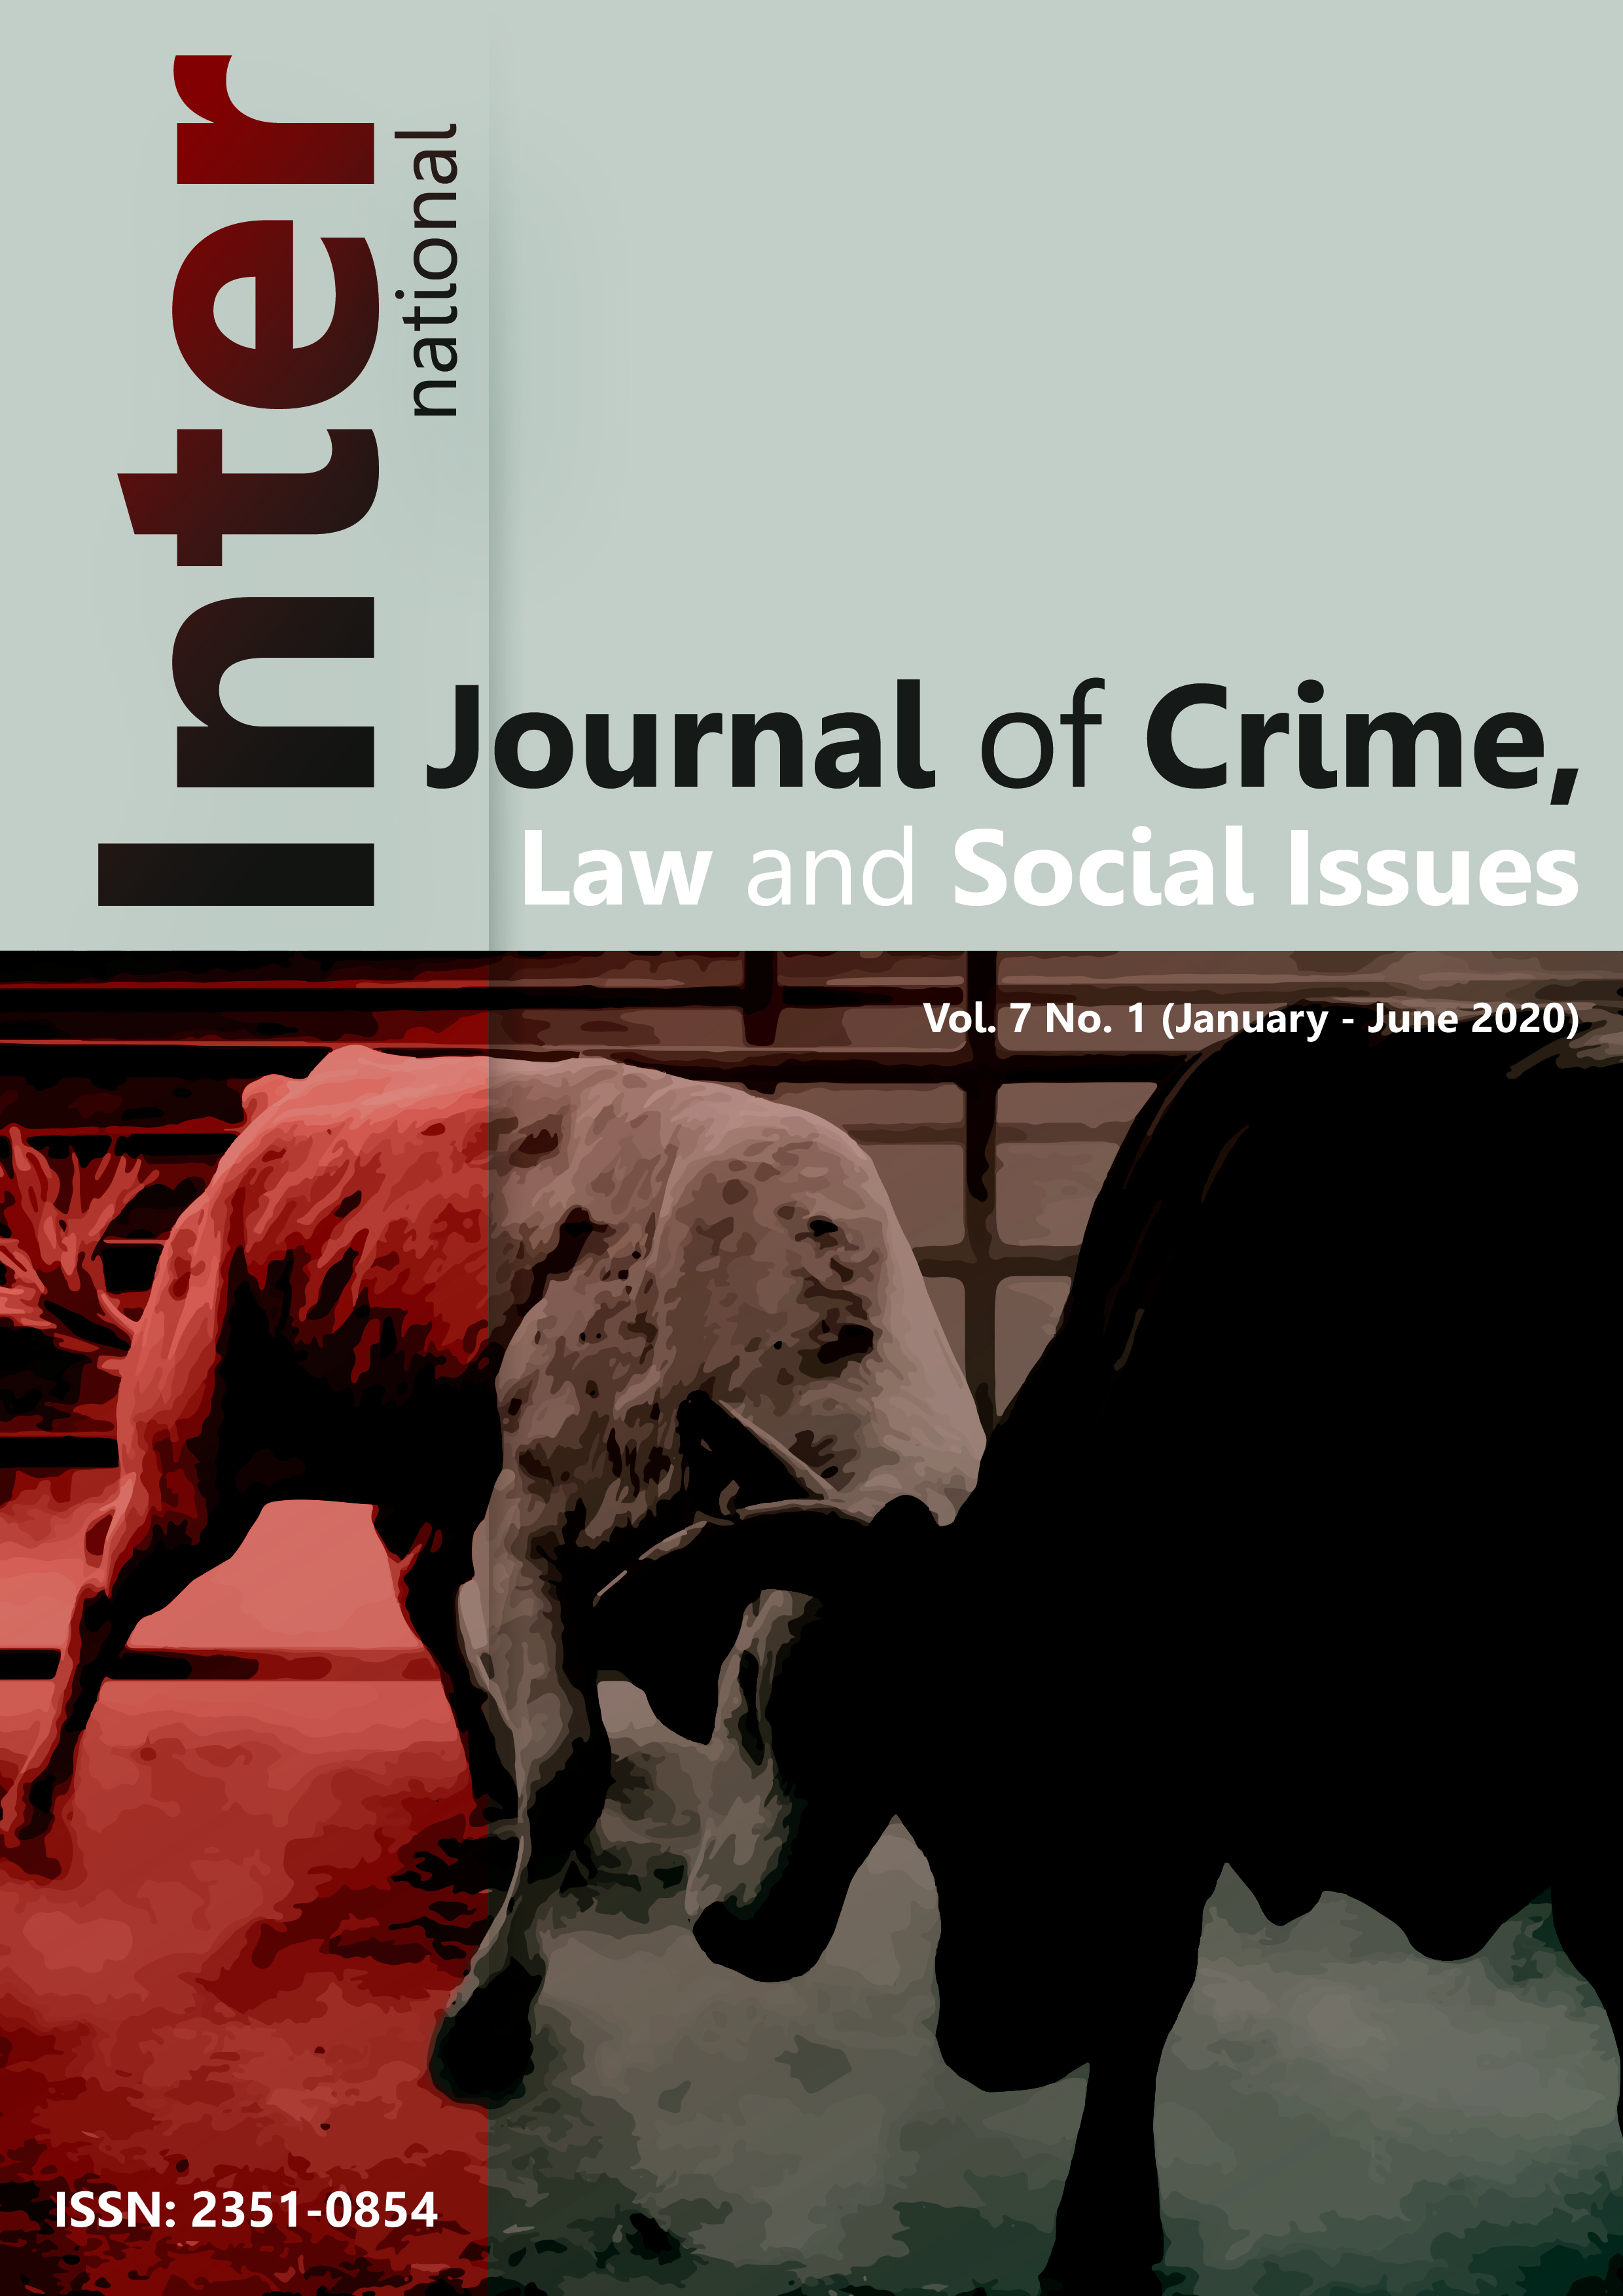 					View Vol. 7 No. 1 (2020): International Journal of Crime, Law and Social Issues, Vol. 7, No. 1, 2020
				